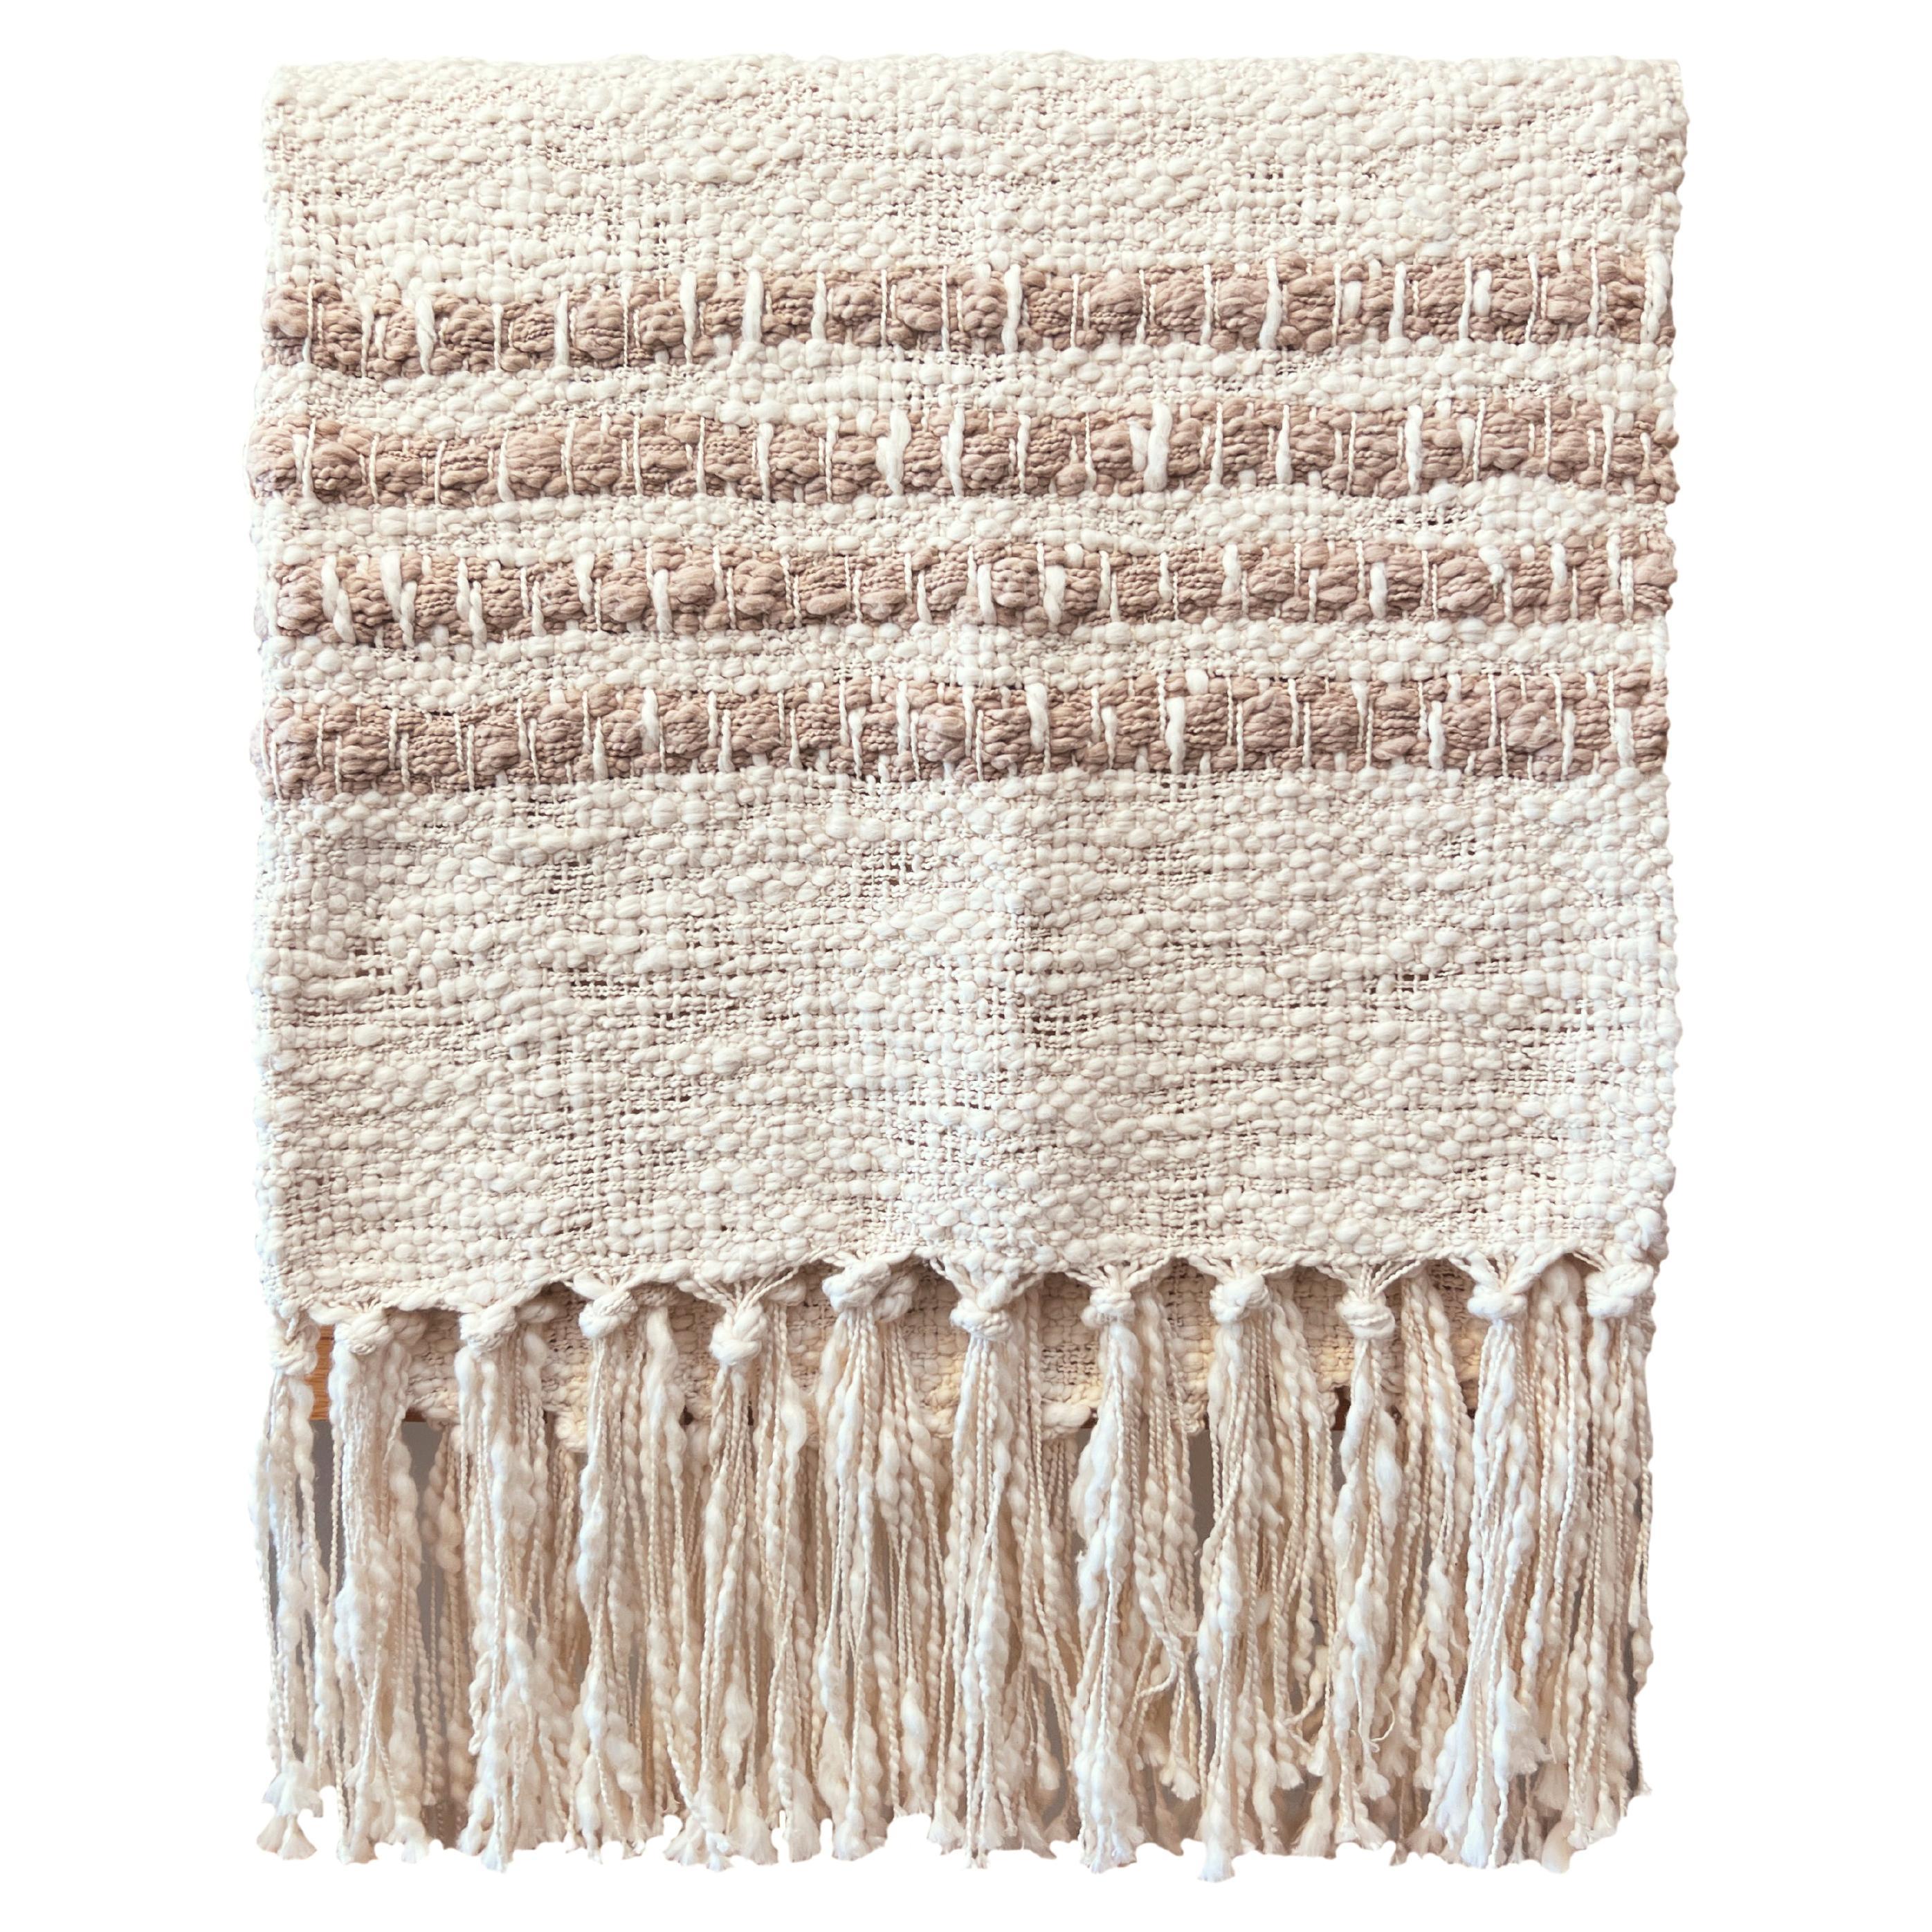 Miel White and Beige Textured Cotton Throw Blanket - Handmade For Sale